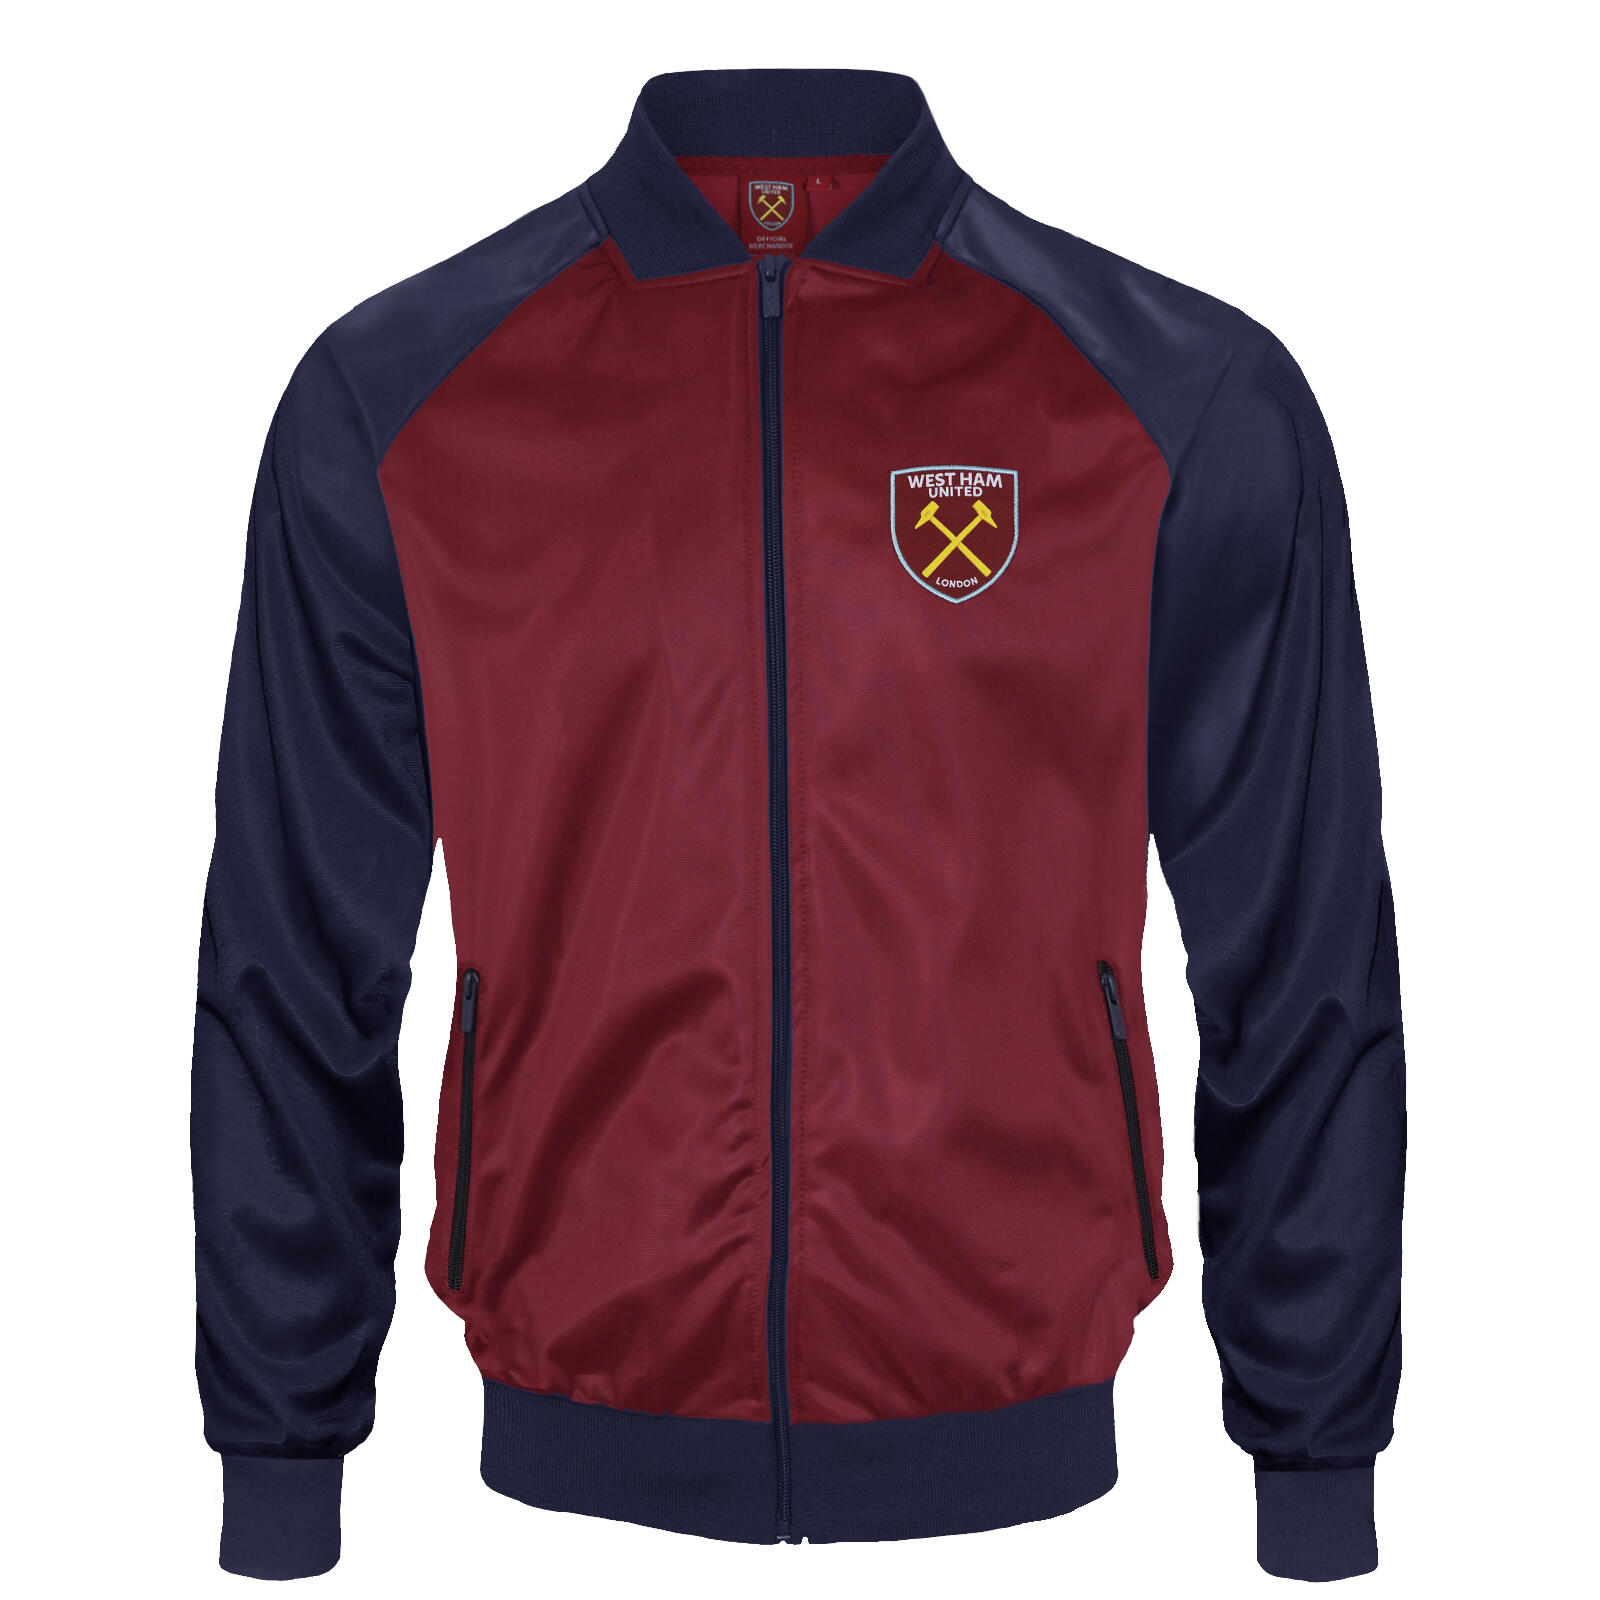 West Ham United Mens Jacket Track Top Retro OFFICIAL Football Gift 1/3